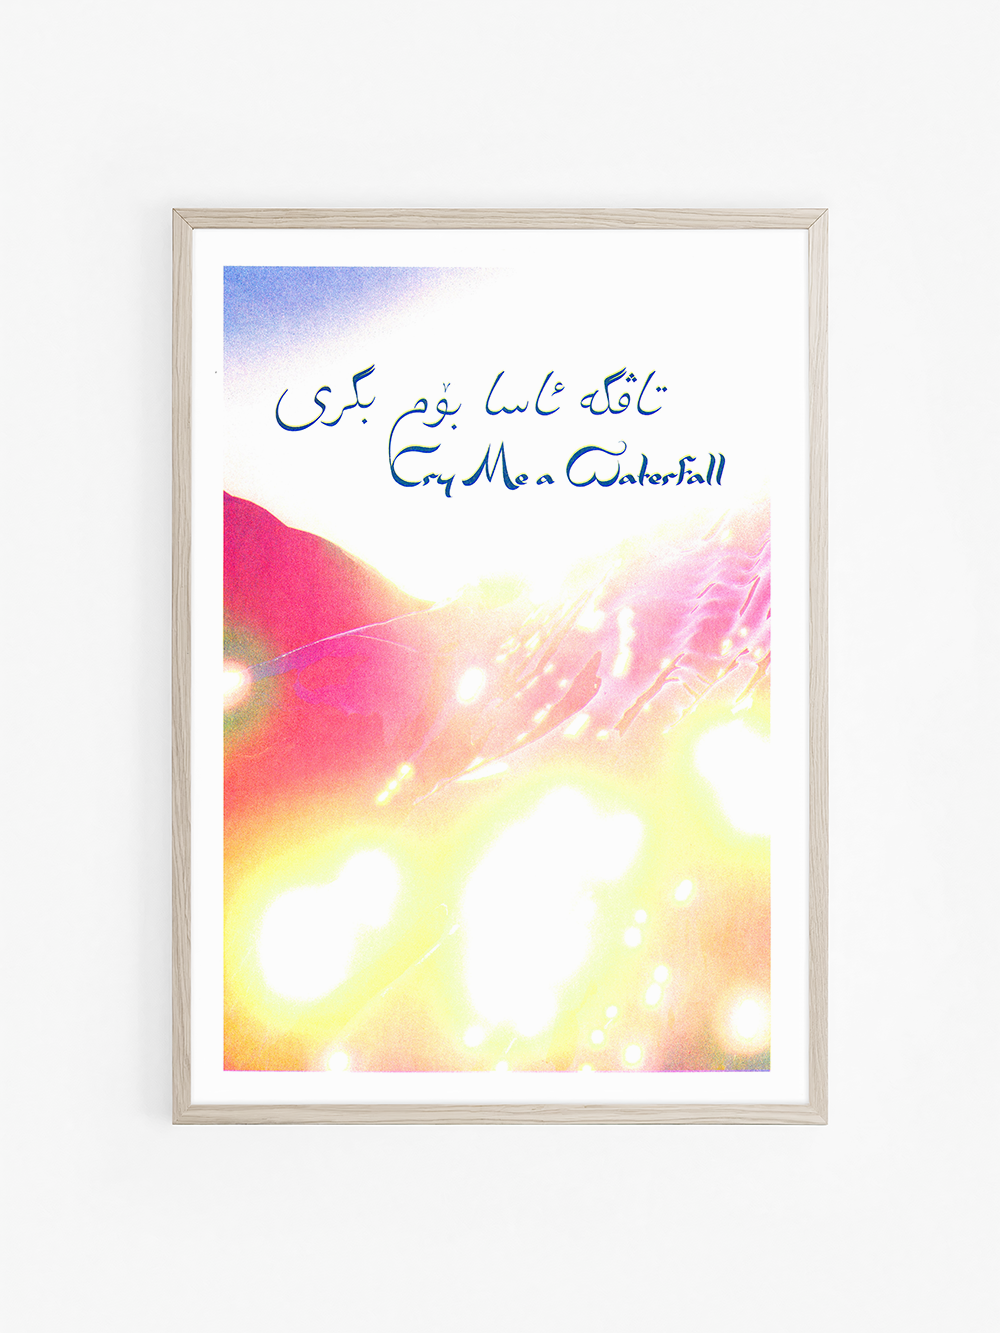  Jala Wahid, Cry Me a Waterfall (Close My Eyes I Dream of You in Slow-mo), Ellipsis Prints 